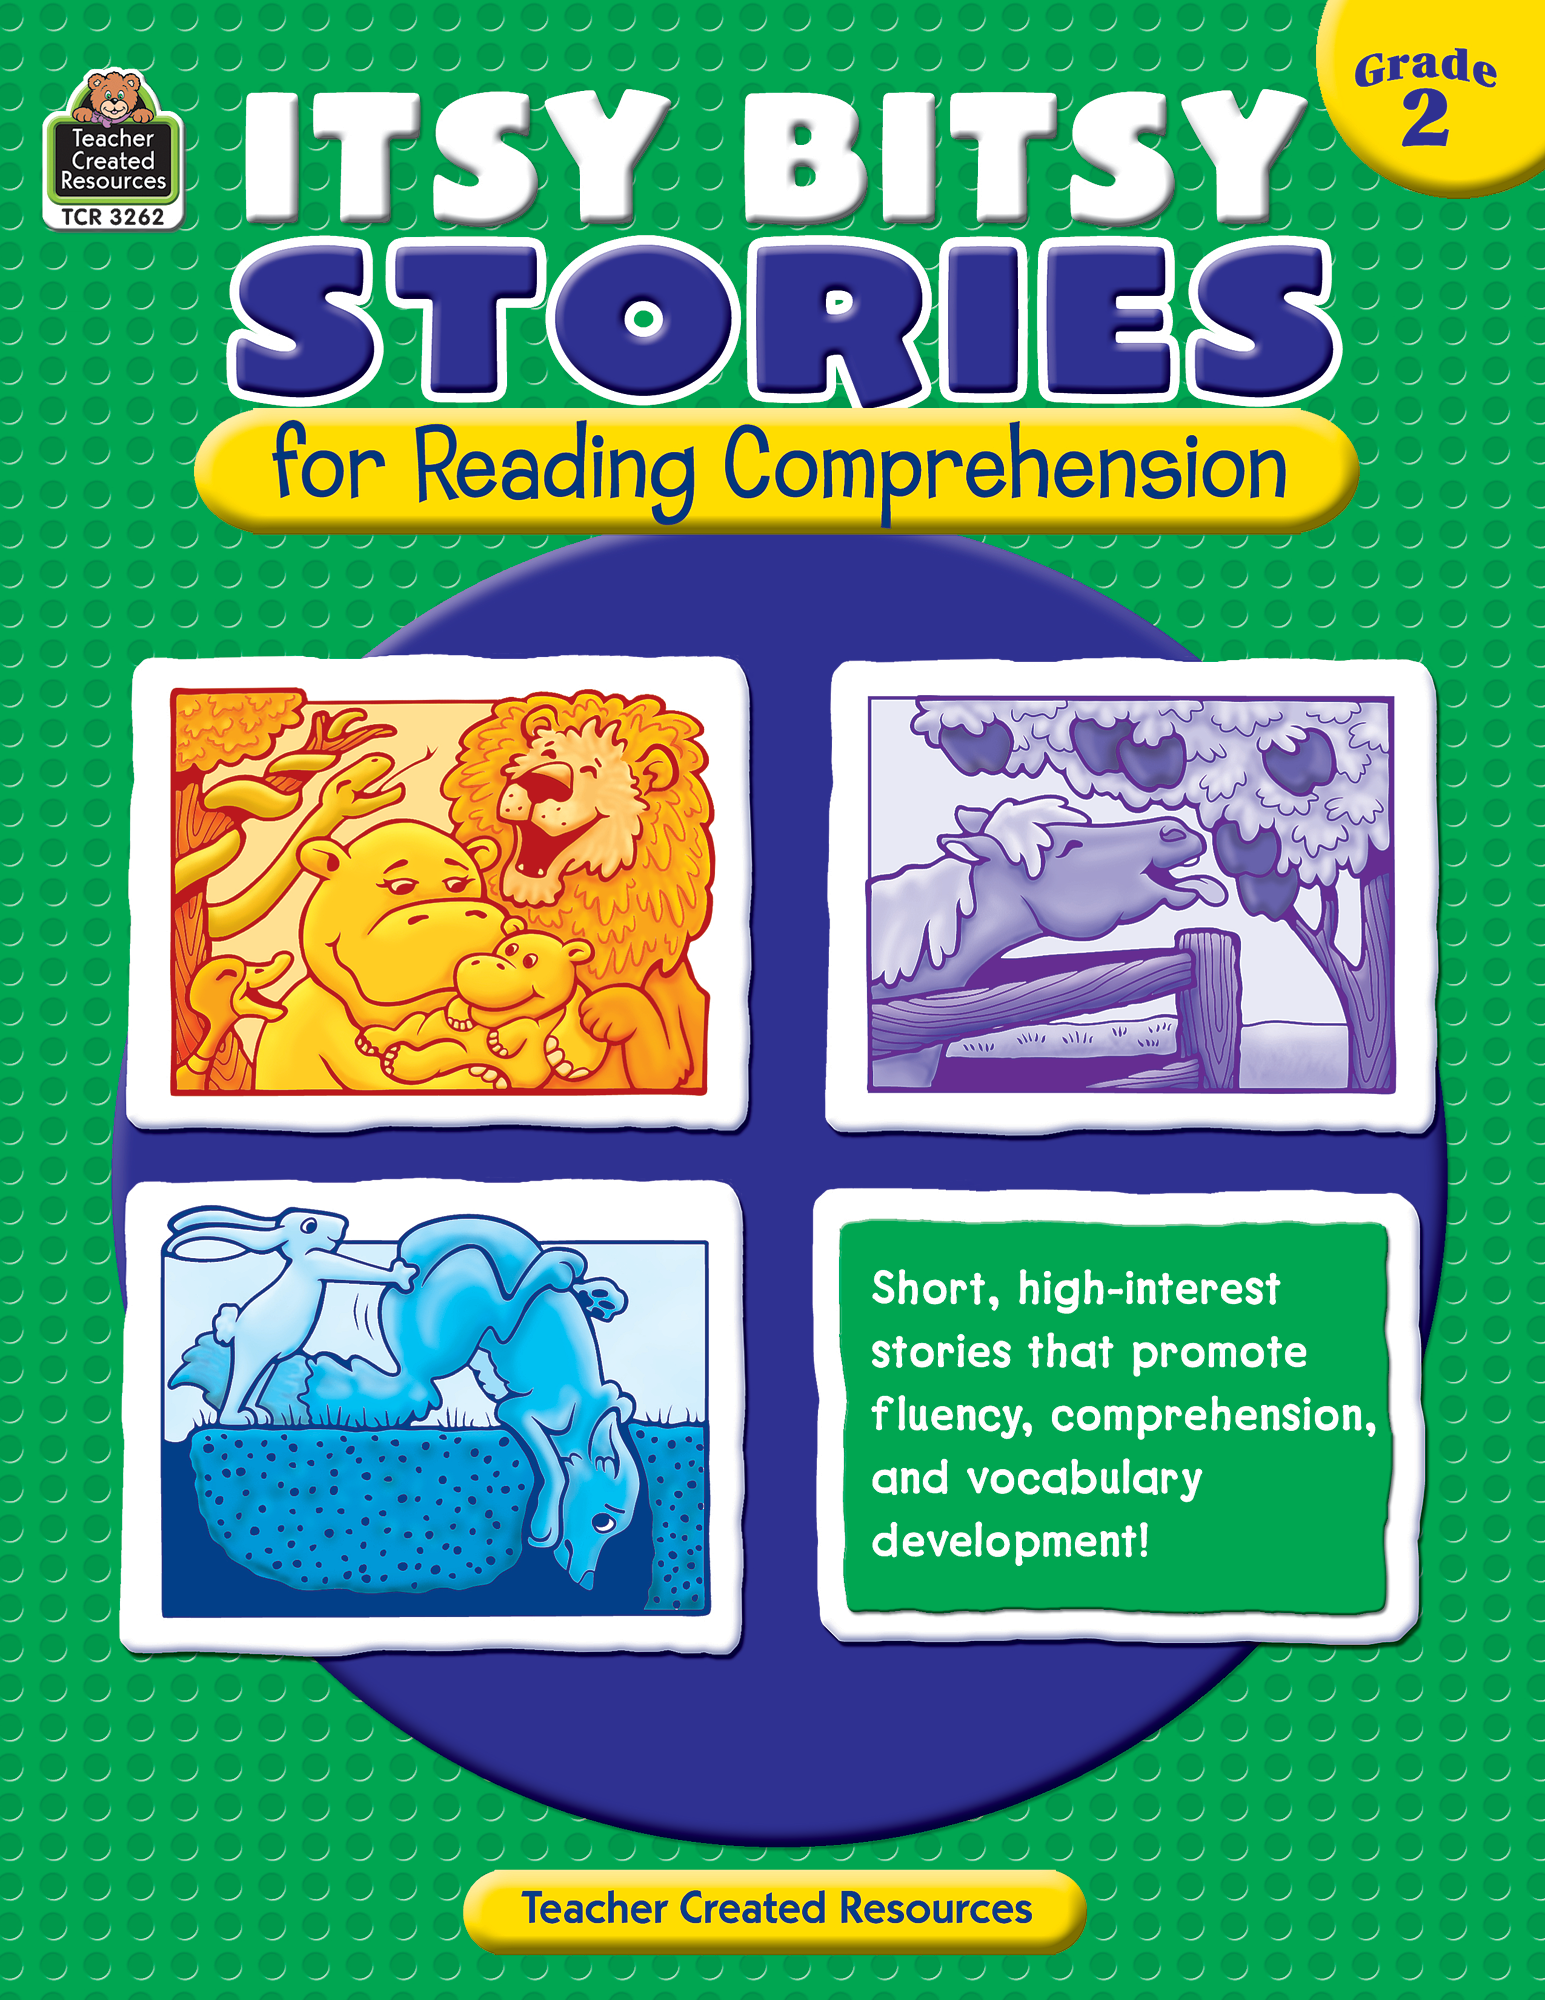 Created　Grade　Itsy　Teacher　Resources　Bitsy　for　Comprehension　Stories　Reading　TCR3262